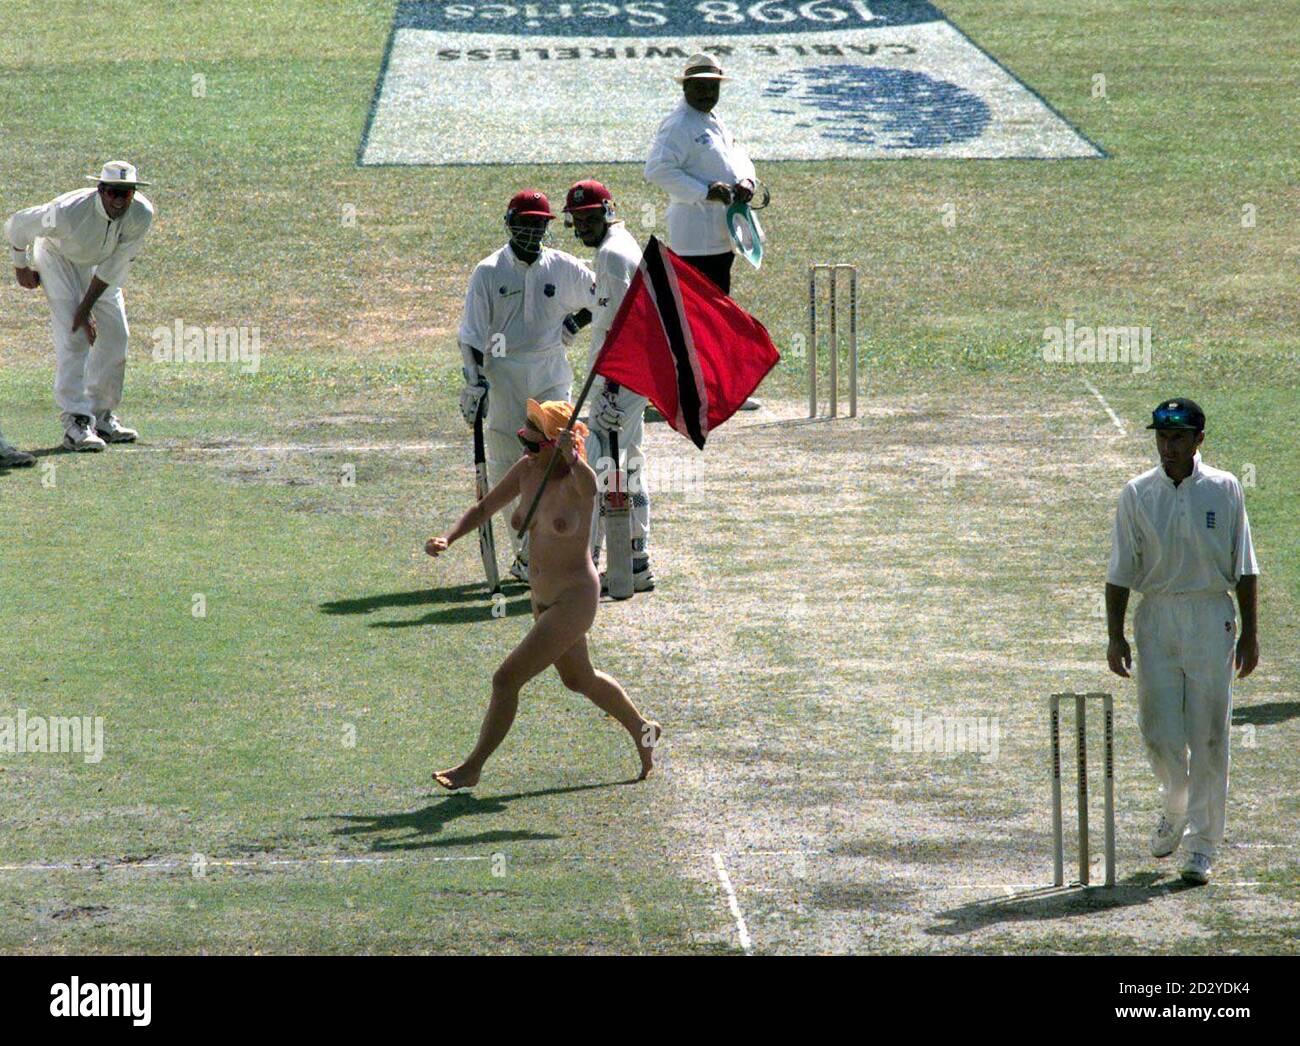 A streaker, during the first day of the 3rd Test at the Queen's Park Oval, Trinidad today (Friday). Picture By Rebecca Naden/PA/*EDI* Stock Photo